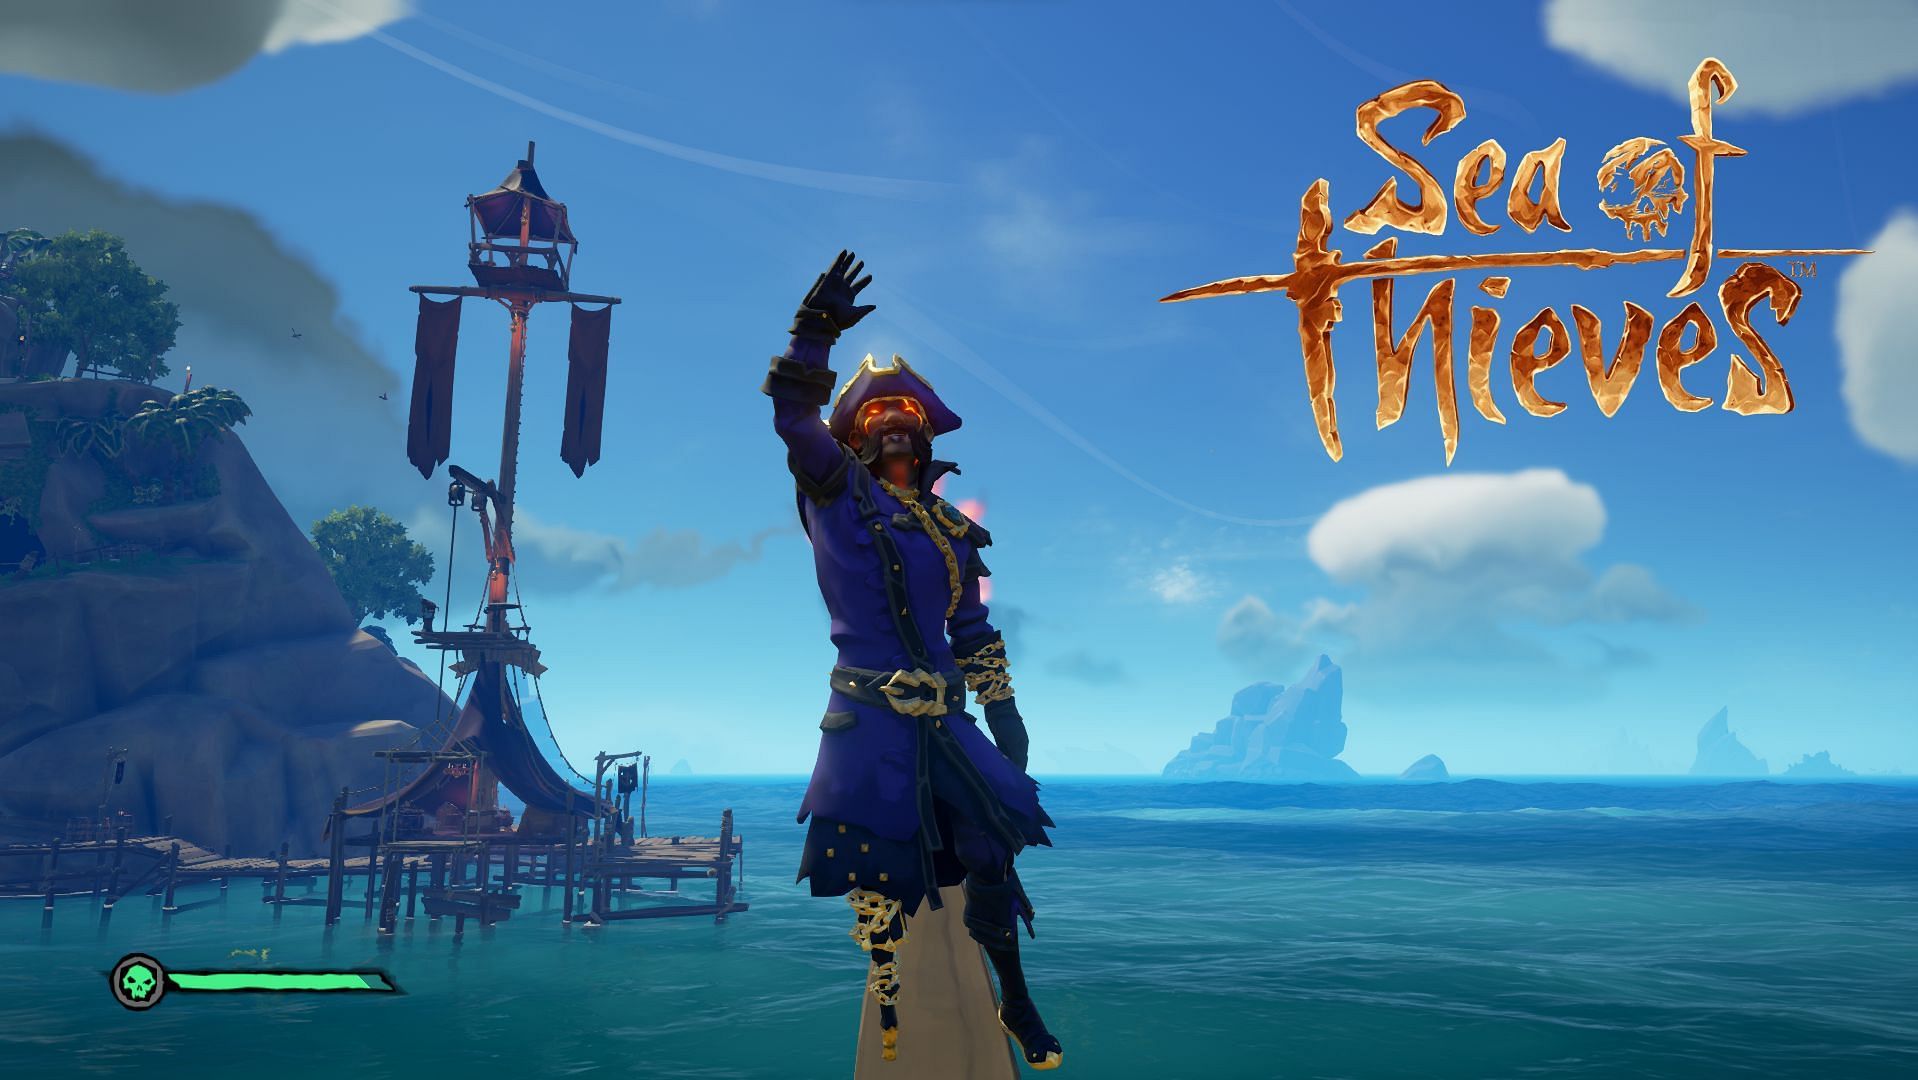 The Pirate Legend costume is a mark of your esteemed status in Sea of Thieves.